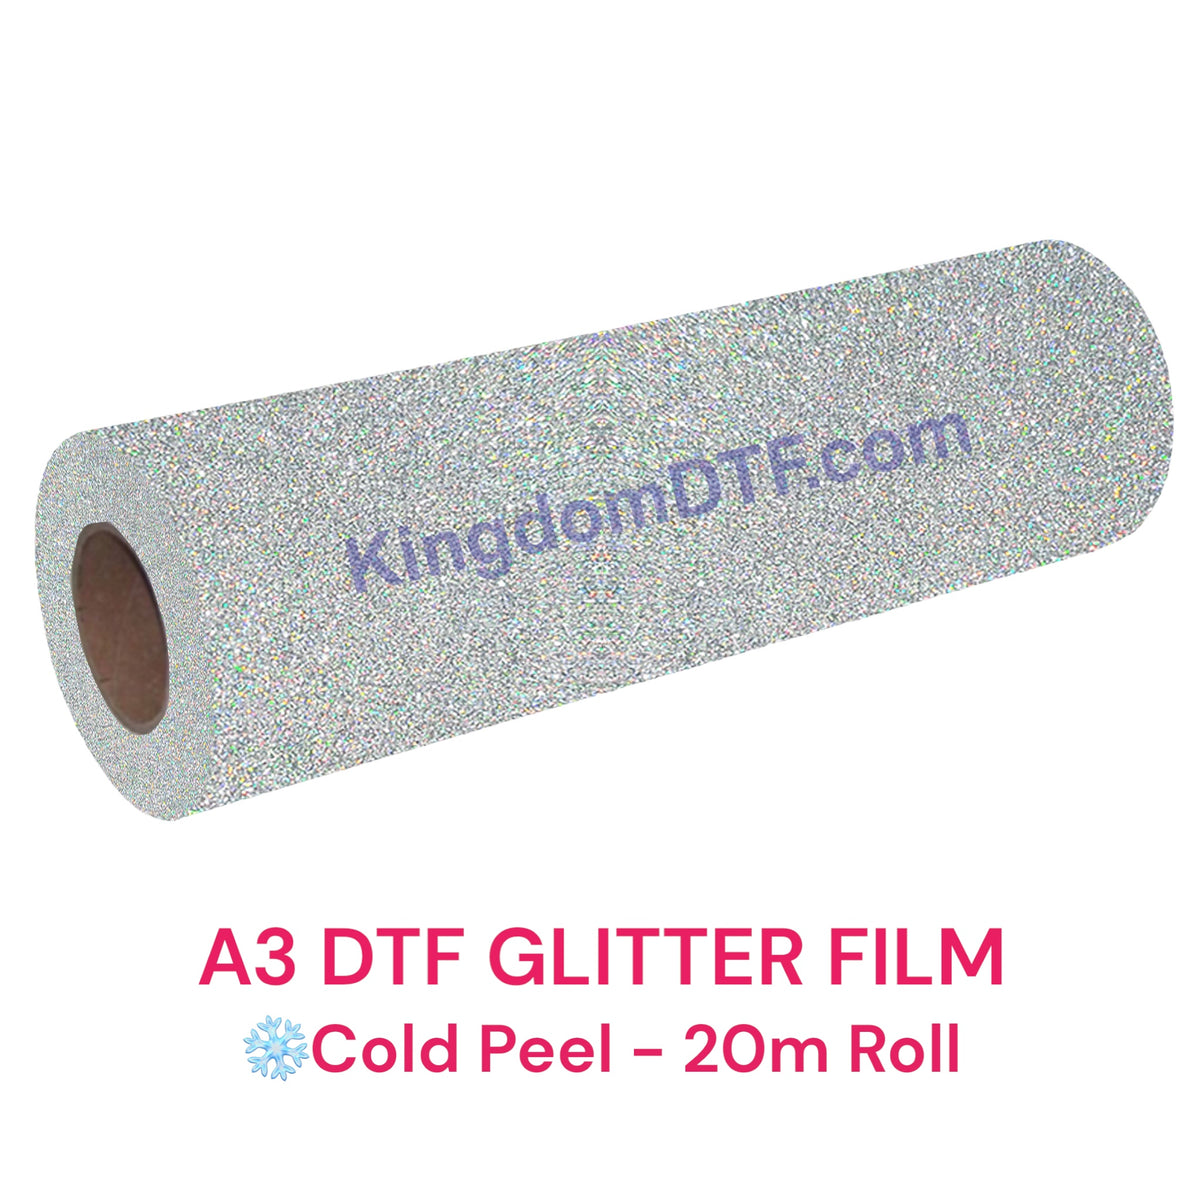 Latest glitter DTF Roll review  How is the quality of DTF glitter